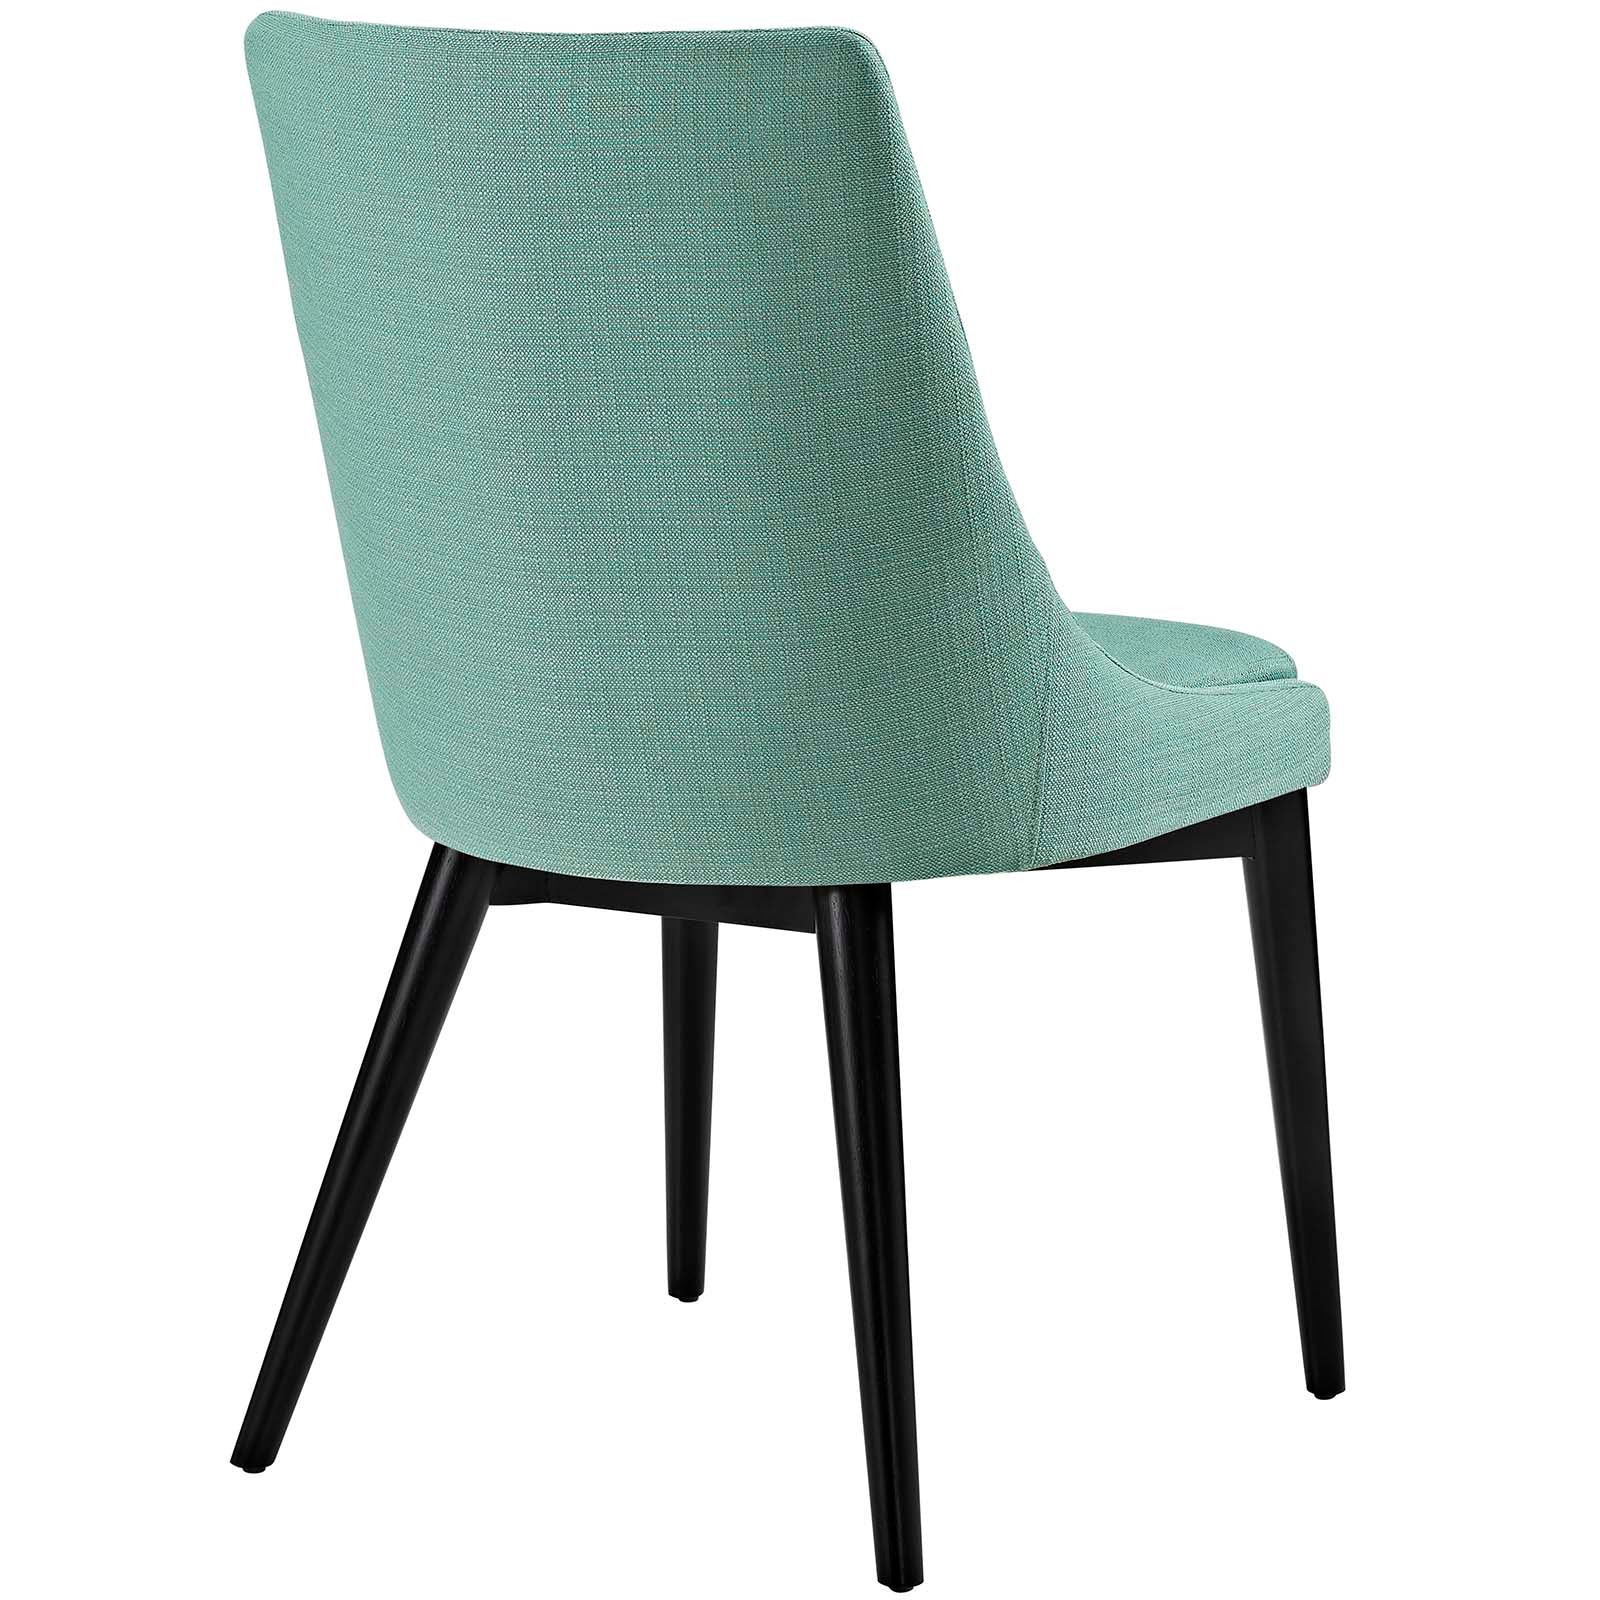 Modway Dining Chairs - Viscount Fabric Dining Chair Laguna